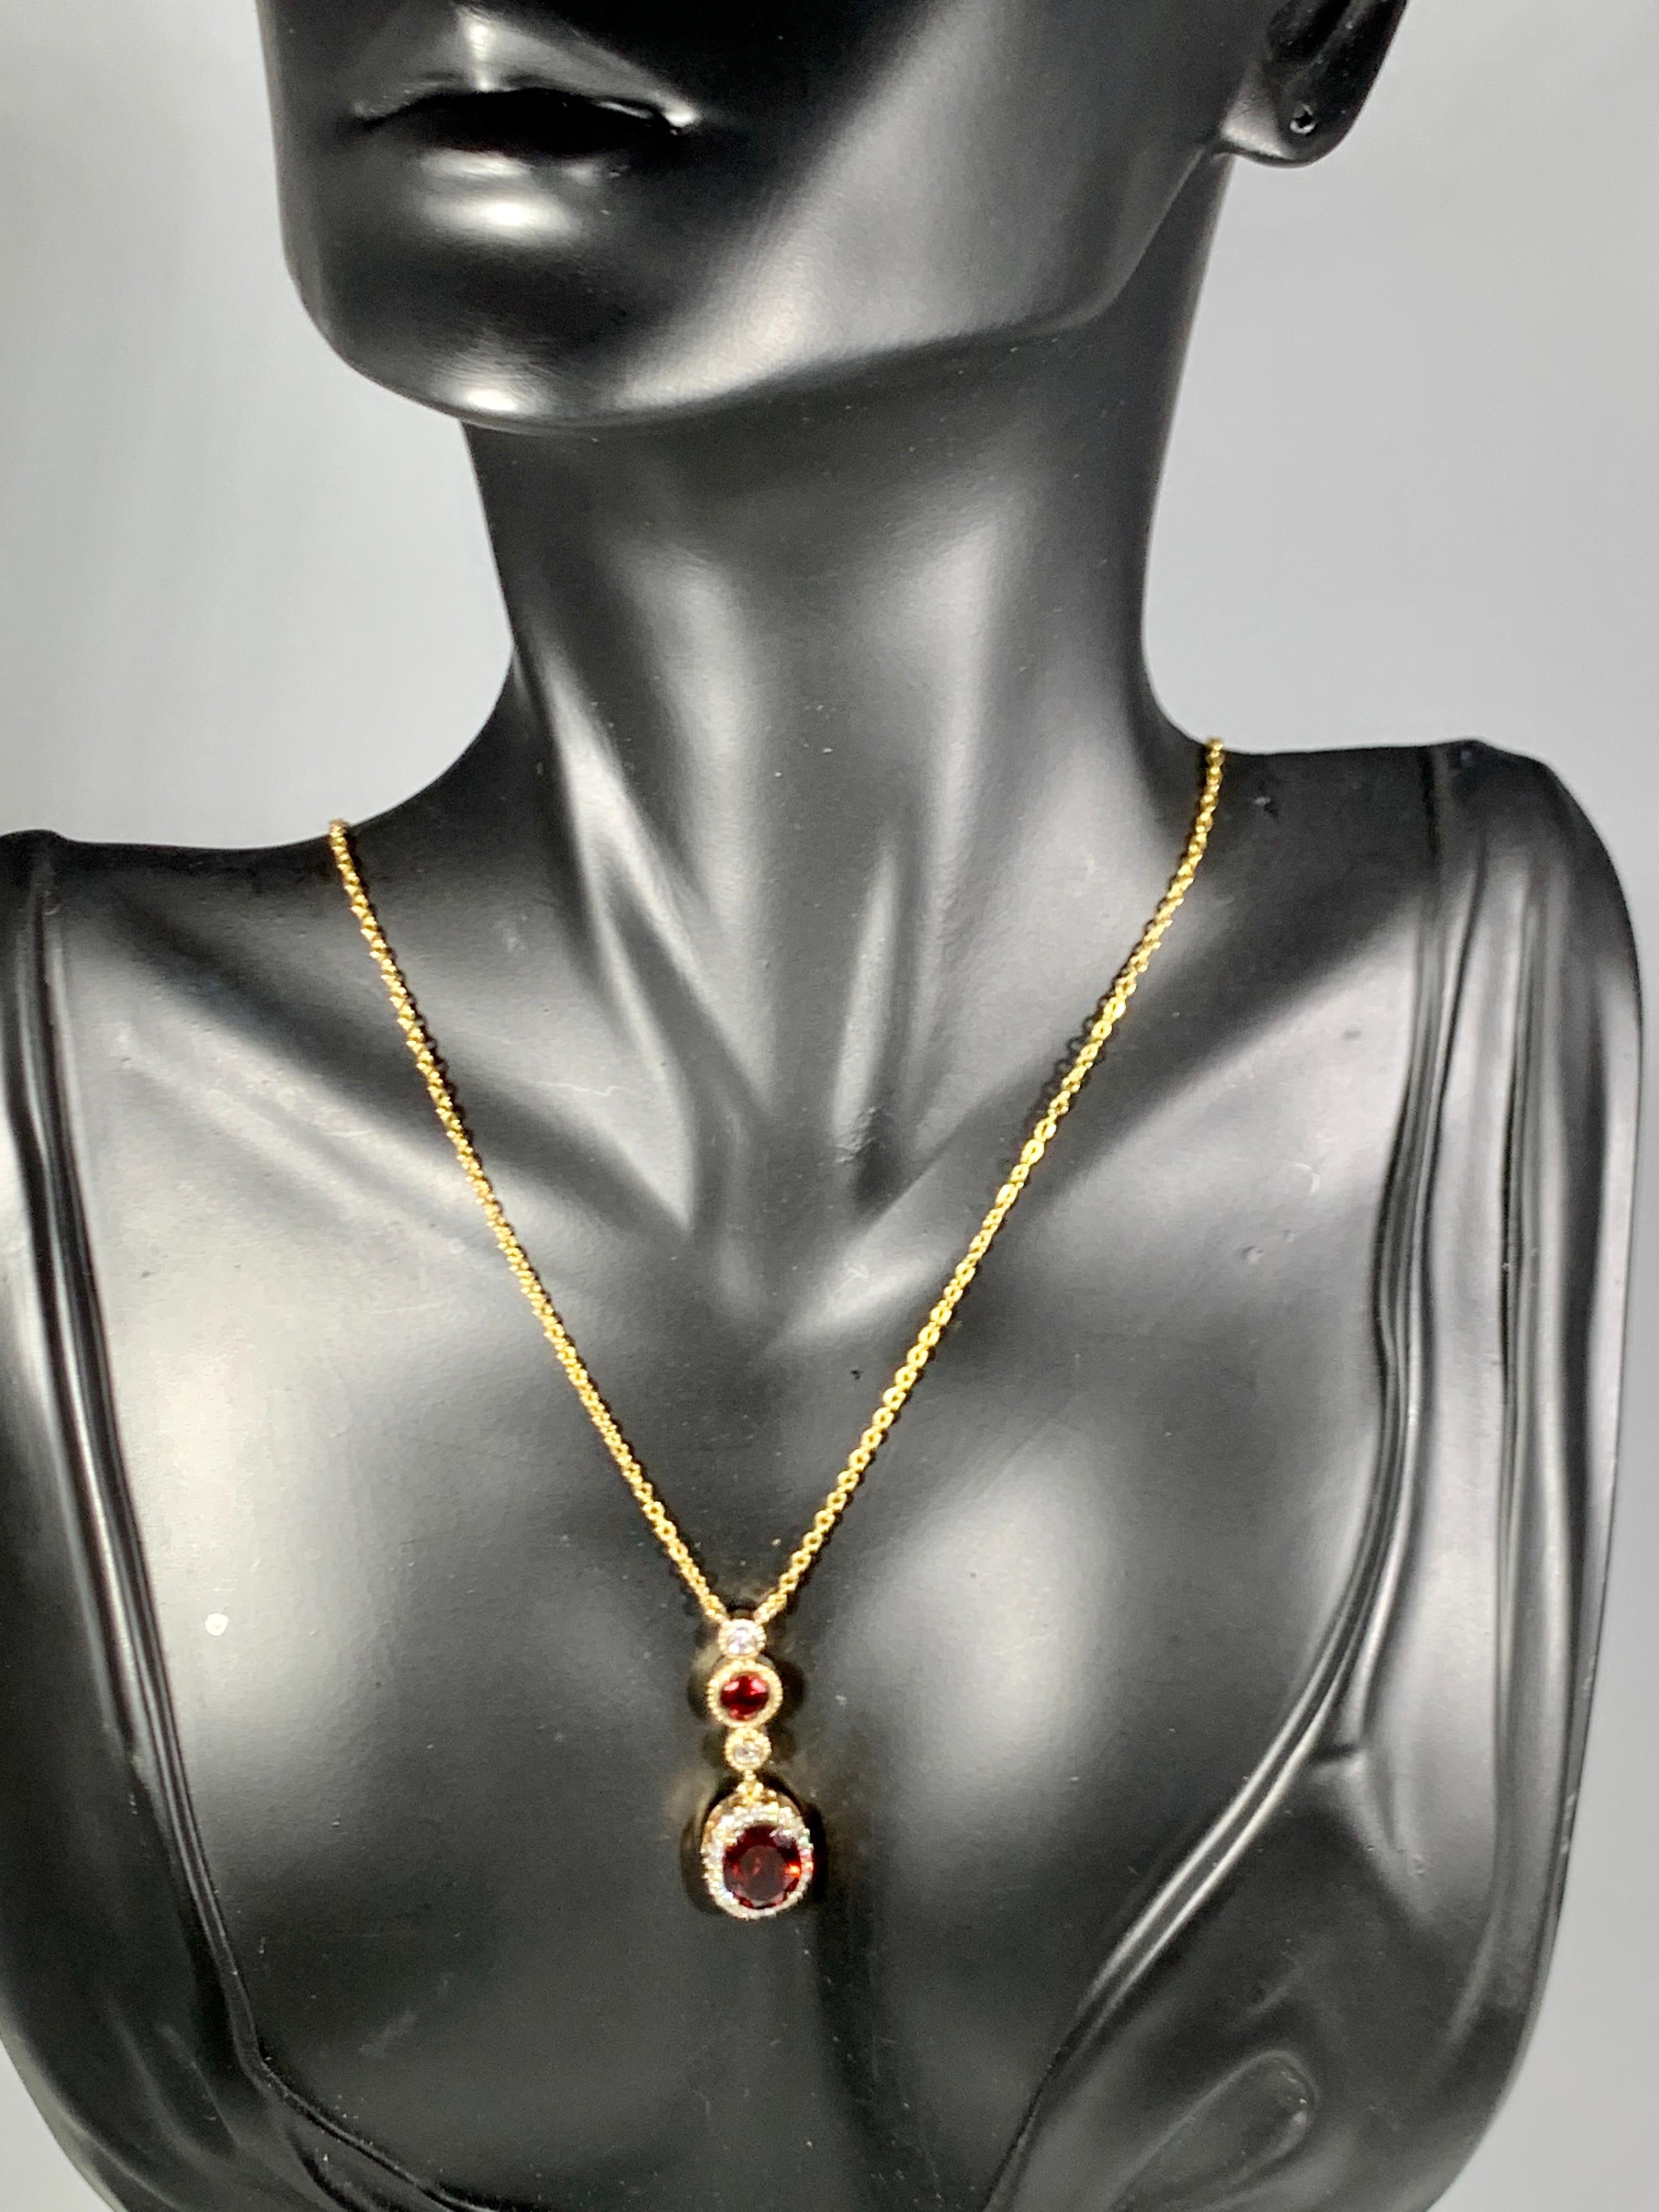 6 Carat Oval Shape Garnet and 0.6 Carat Diamond Necklace in 14 Karat Yellow Gold For Sale 5